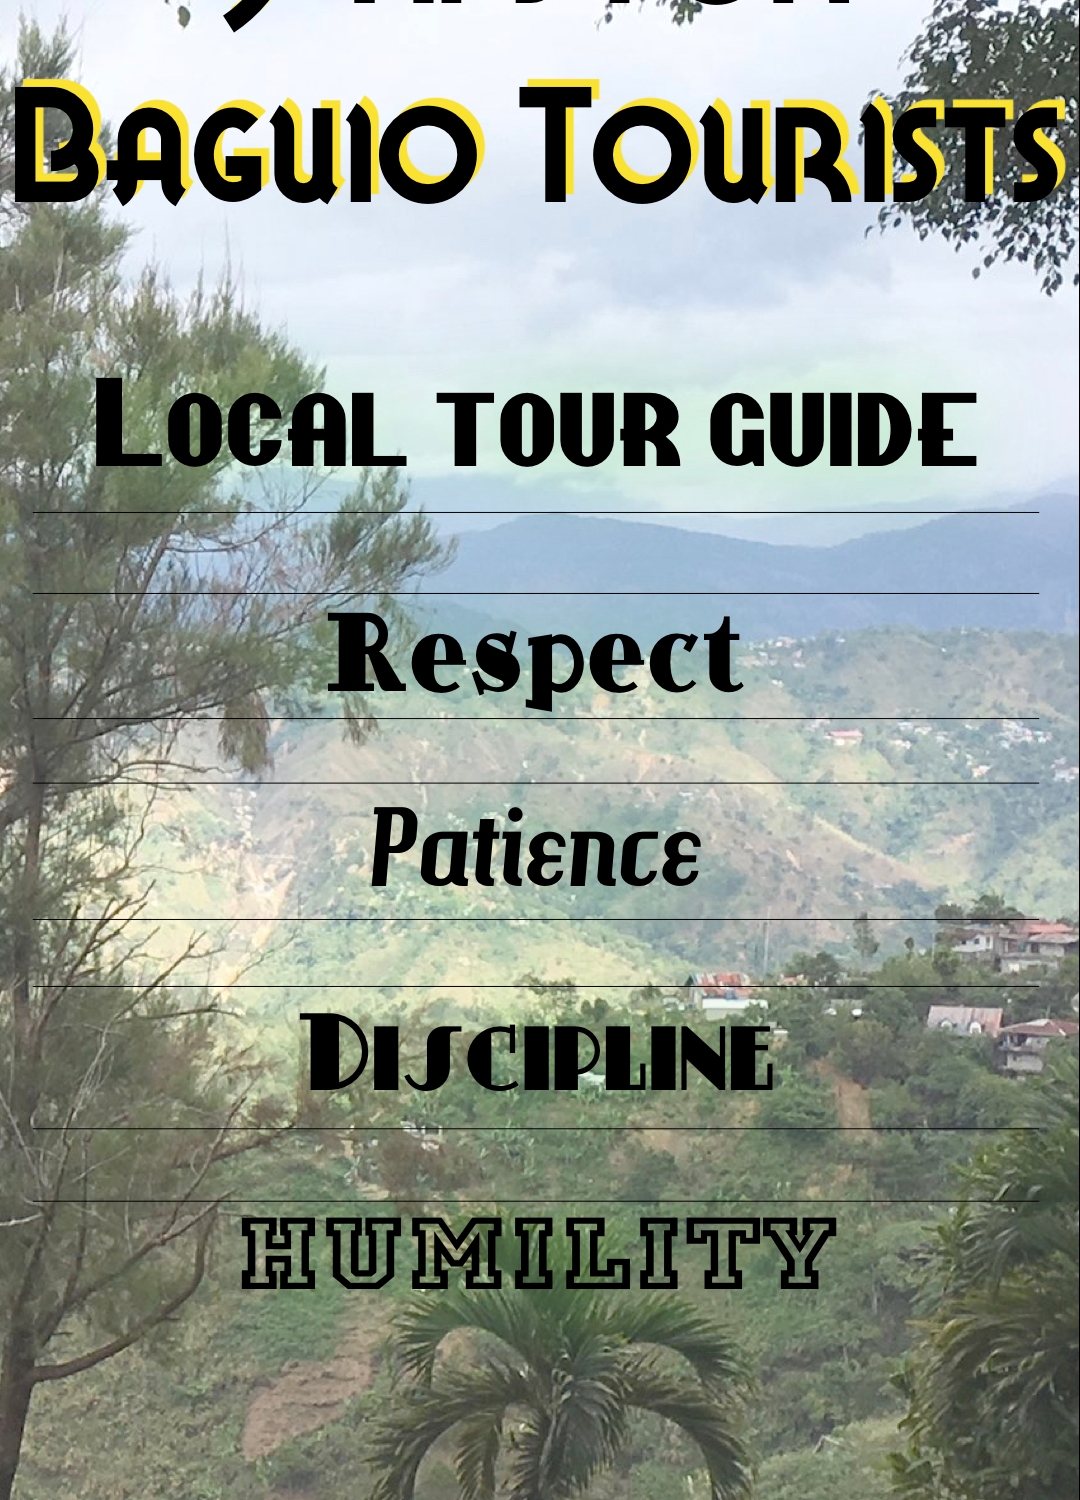 5 Tips for Baguio Tourist - Travelure Travel and Tours